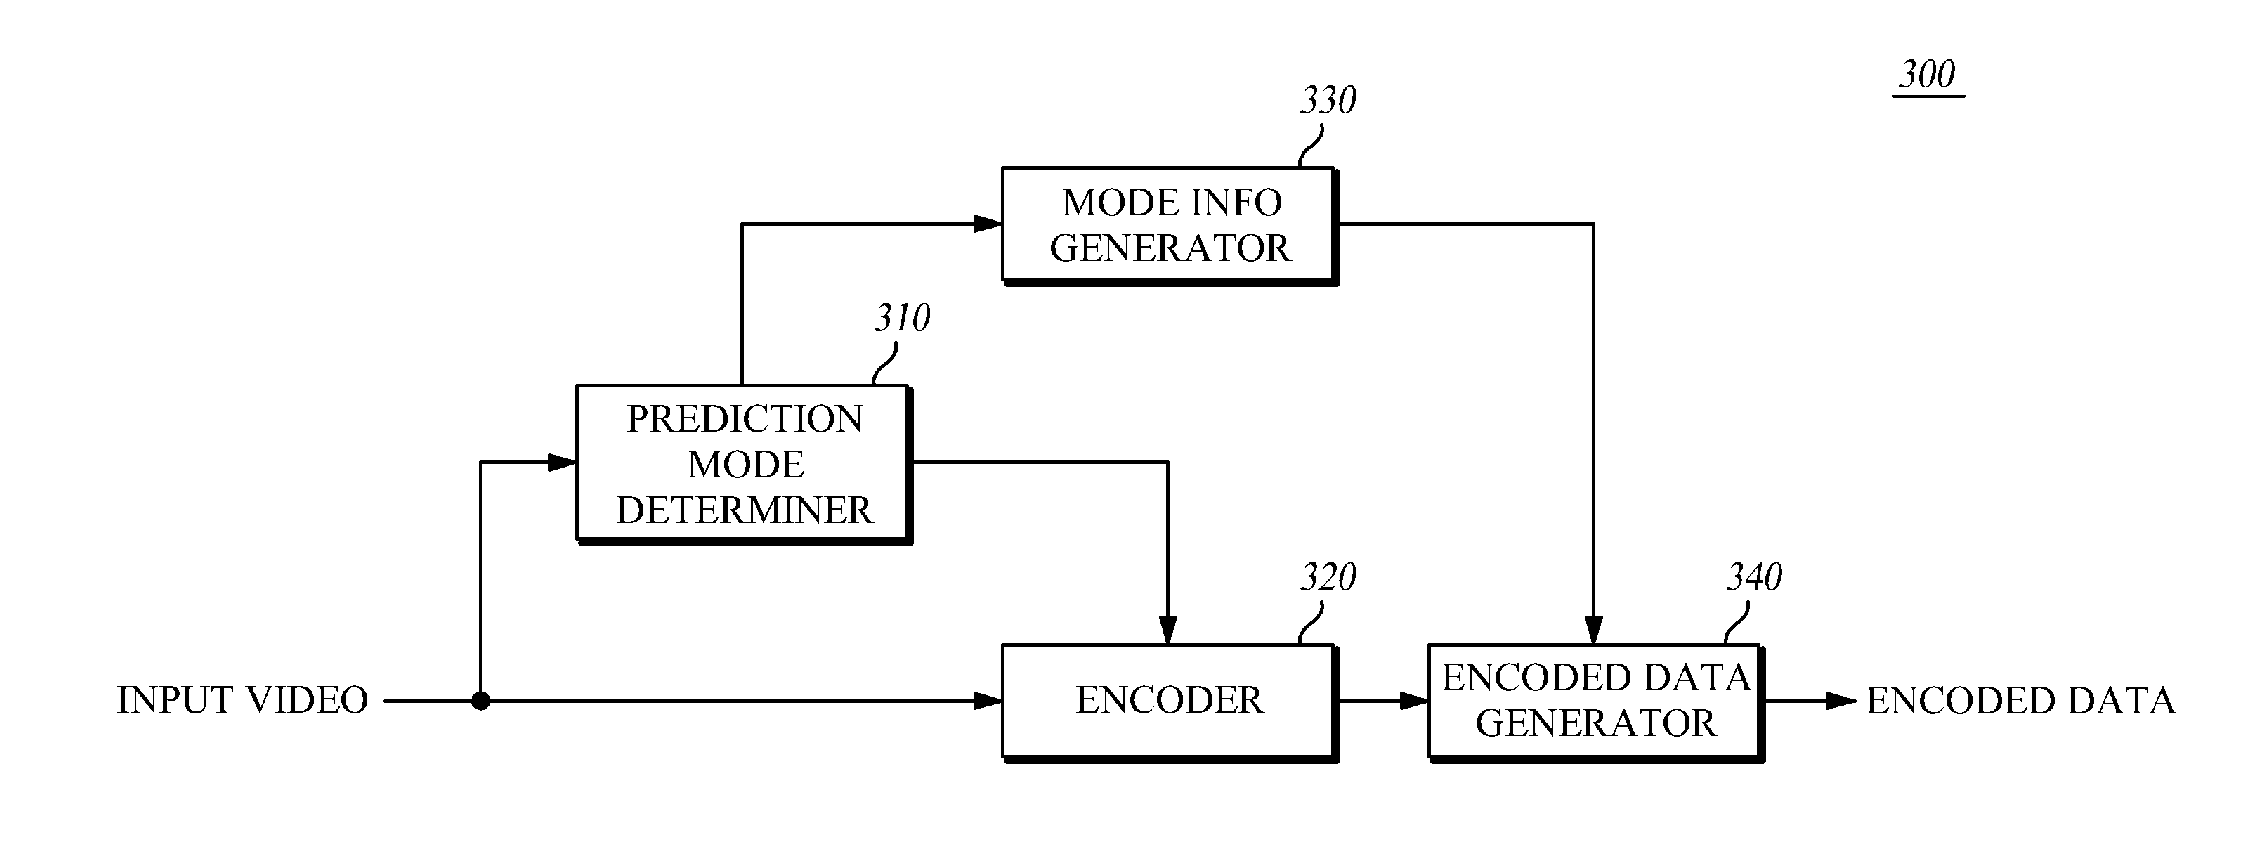 Apparatus and method for image encoding/decoding using predictability of intra-prediction mode